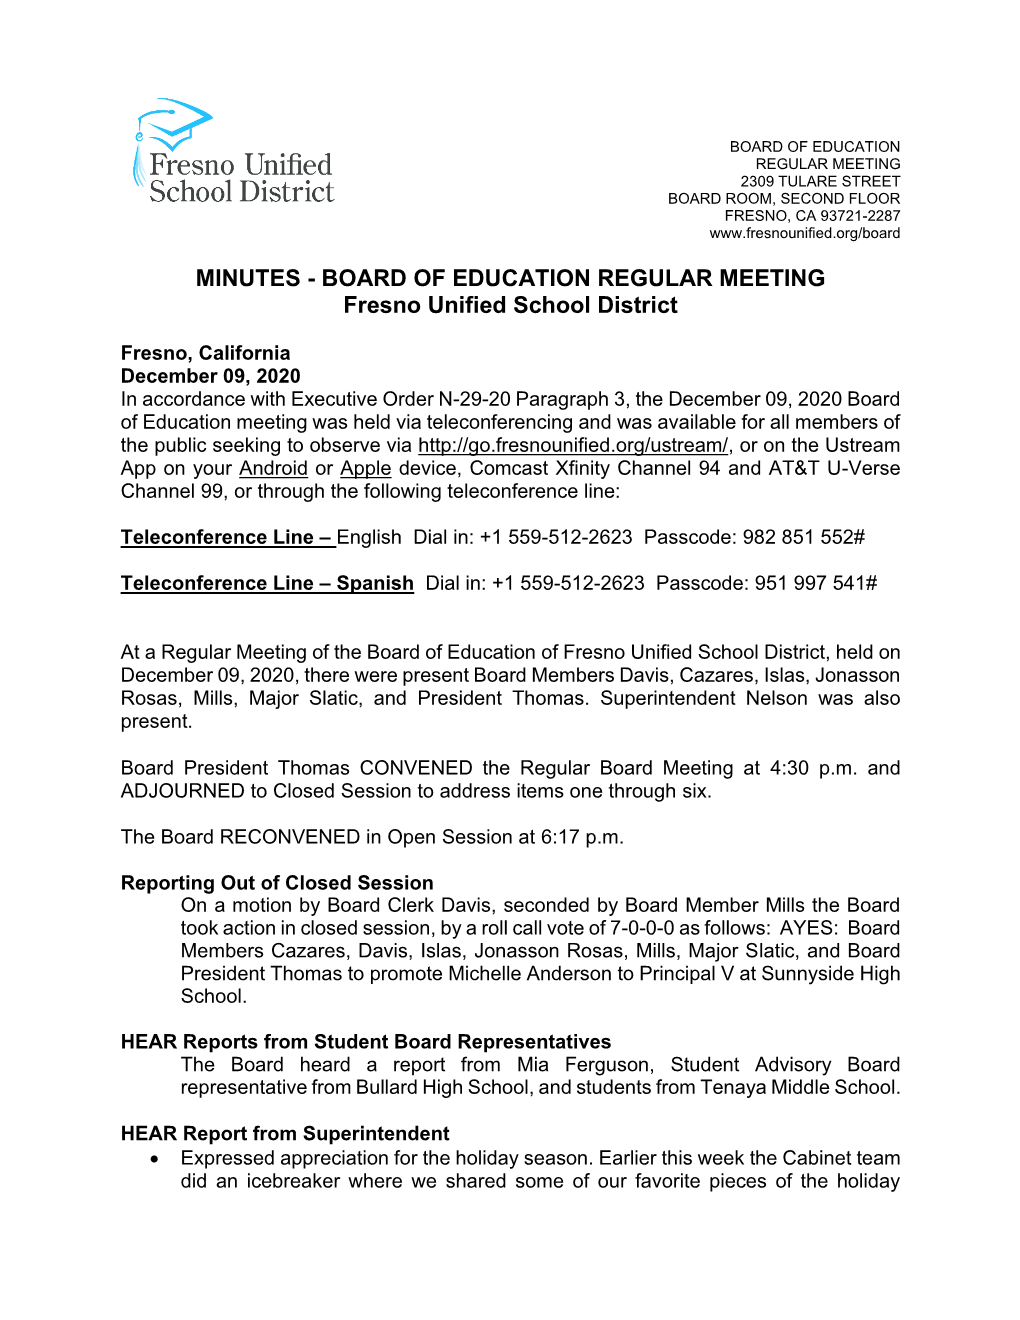 MINUTES - BOARD of EDUCATION REGULAR MEETING Fresno Unified School District